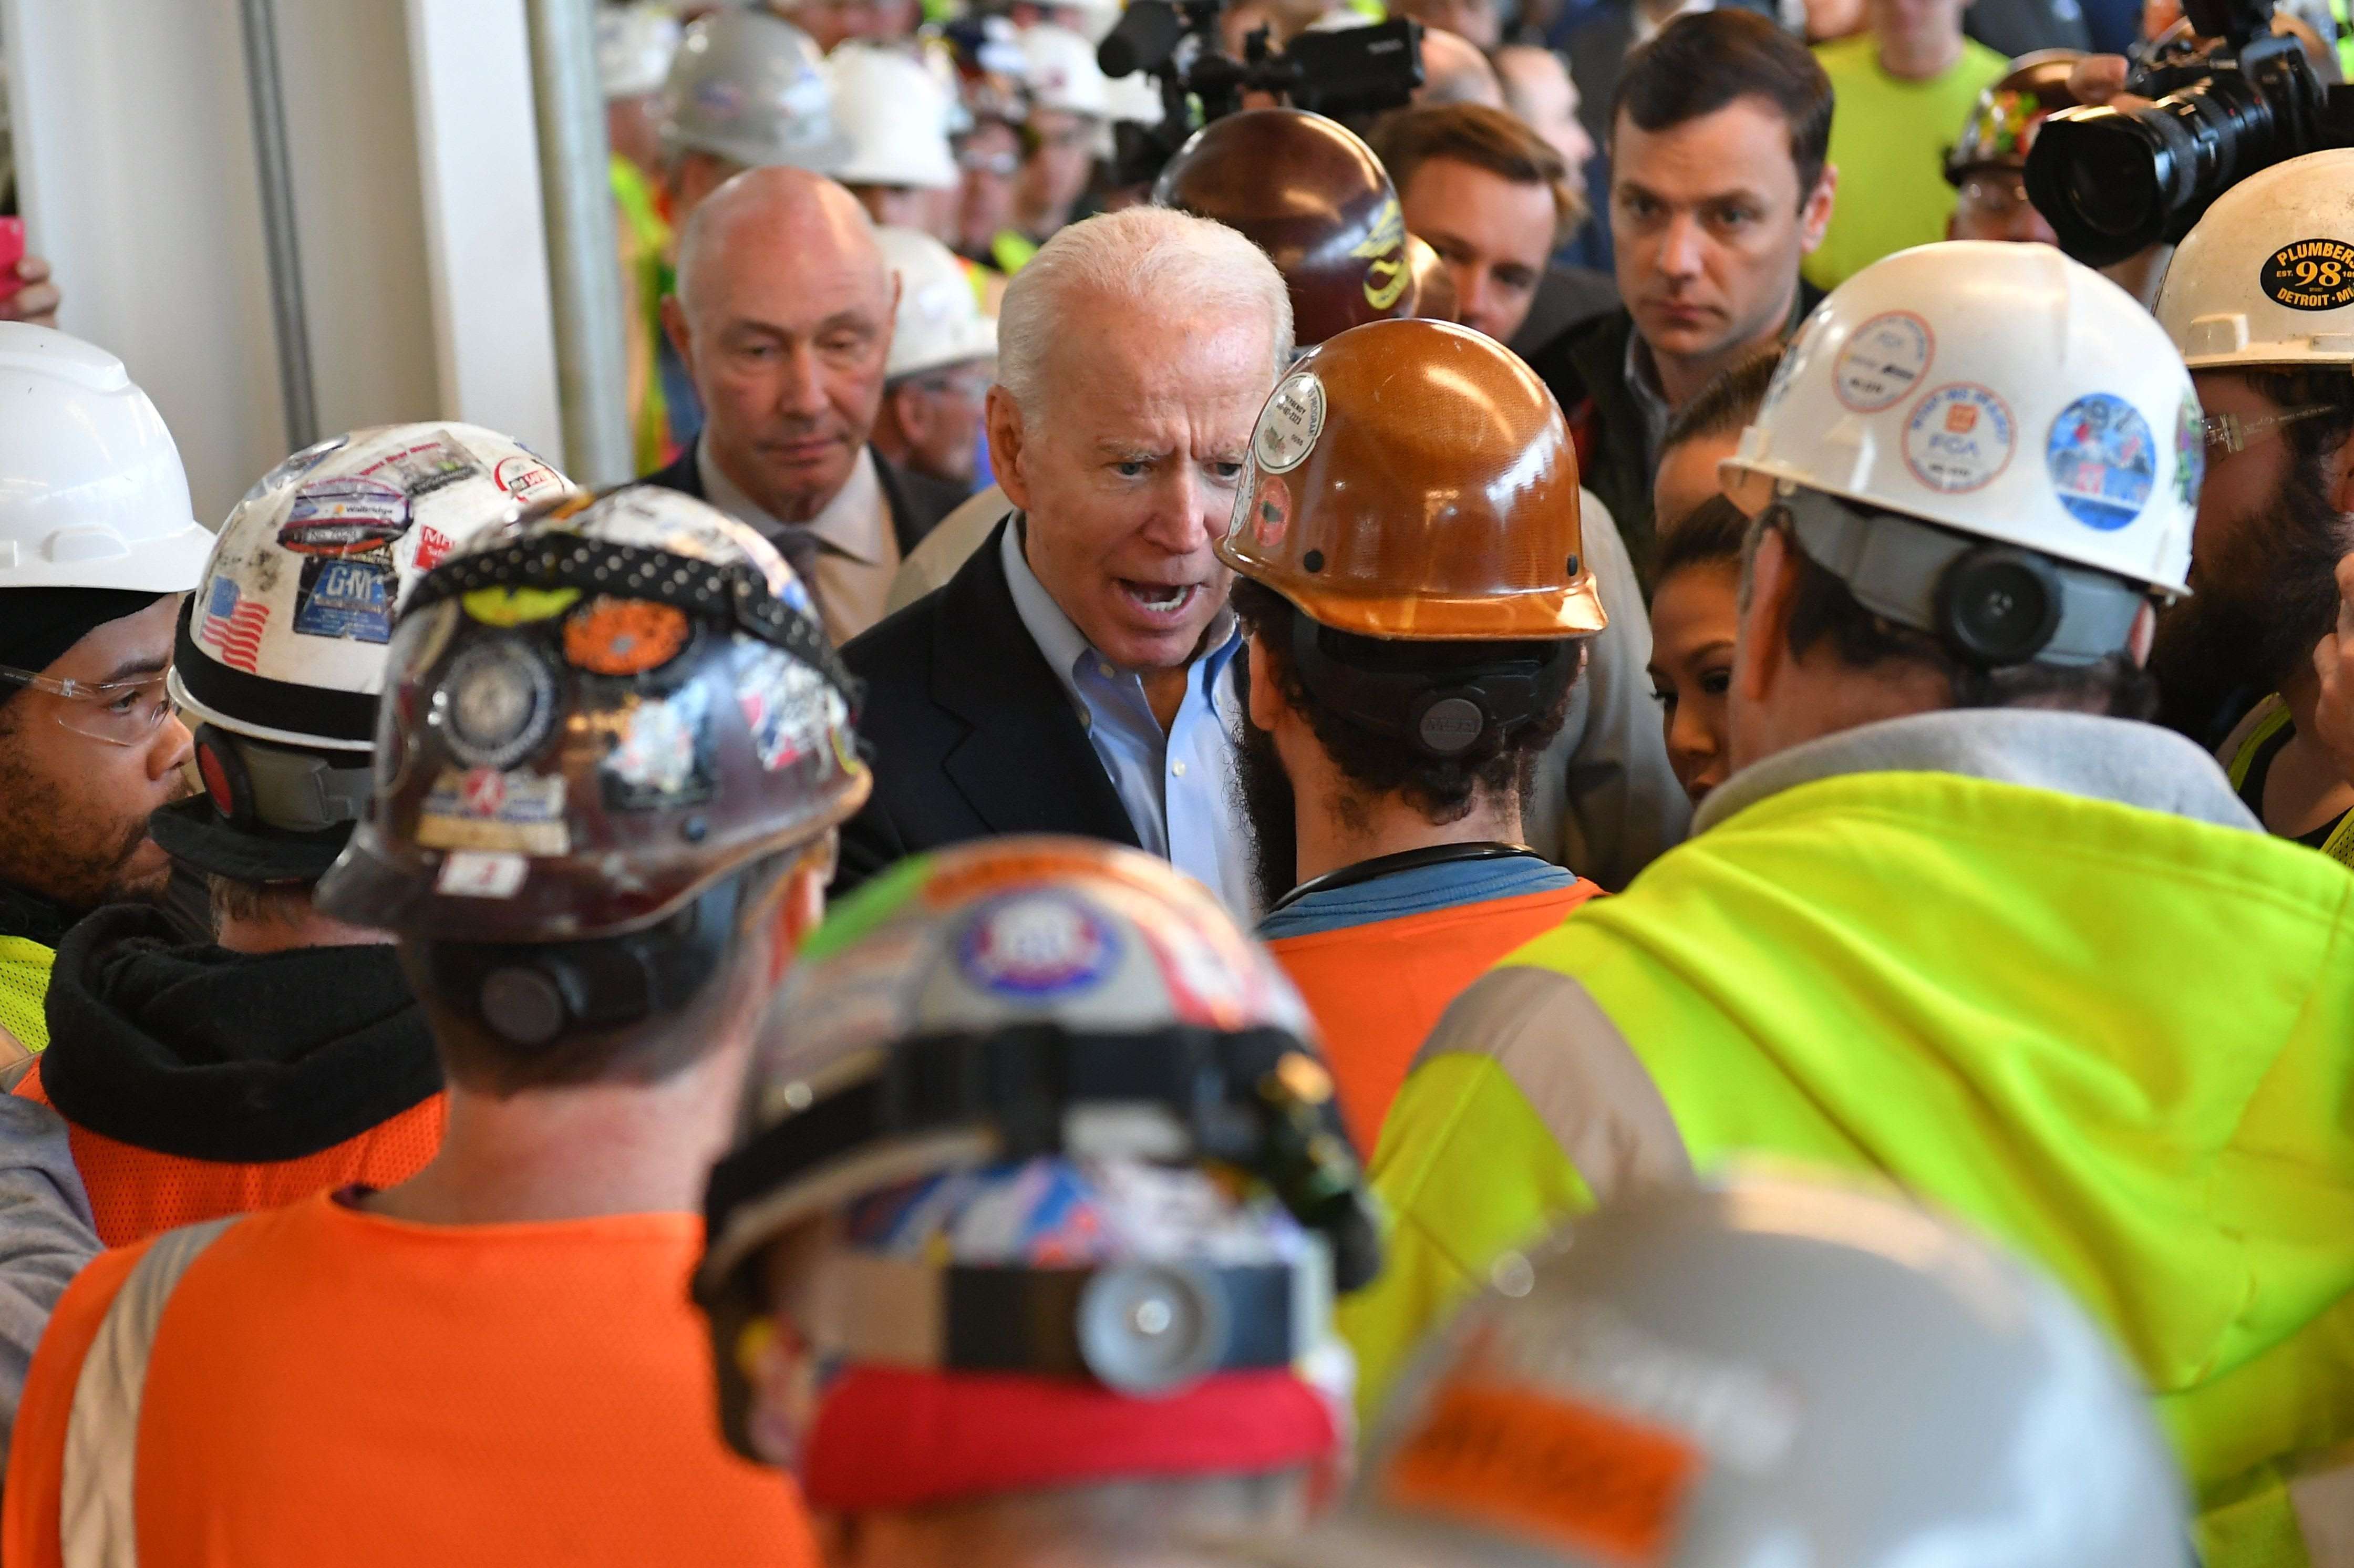 image for Joe Biden tells factory worker 'you're full of s---' during a tense argument over guns